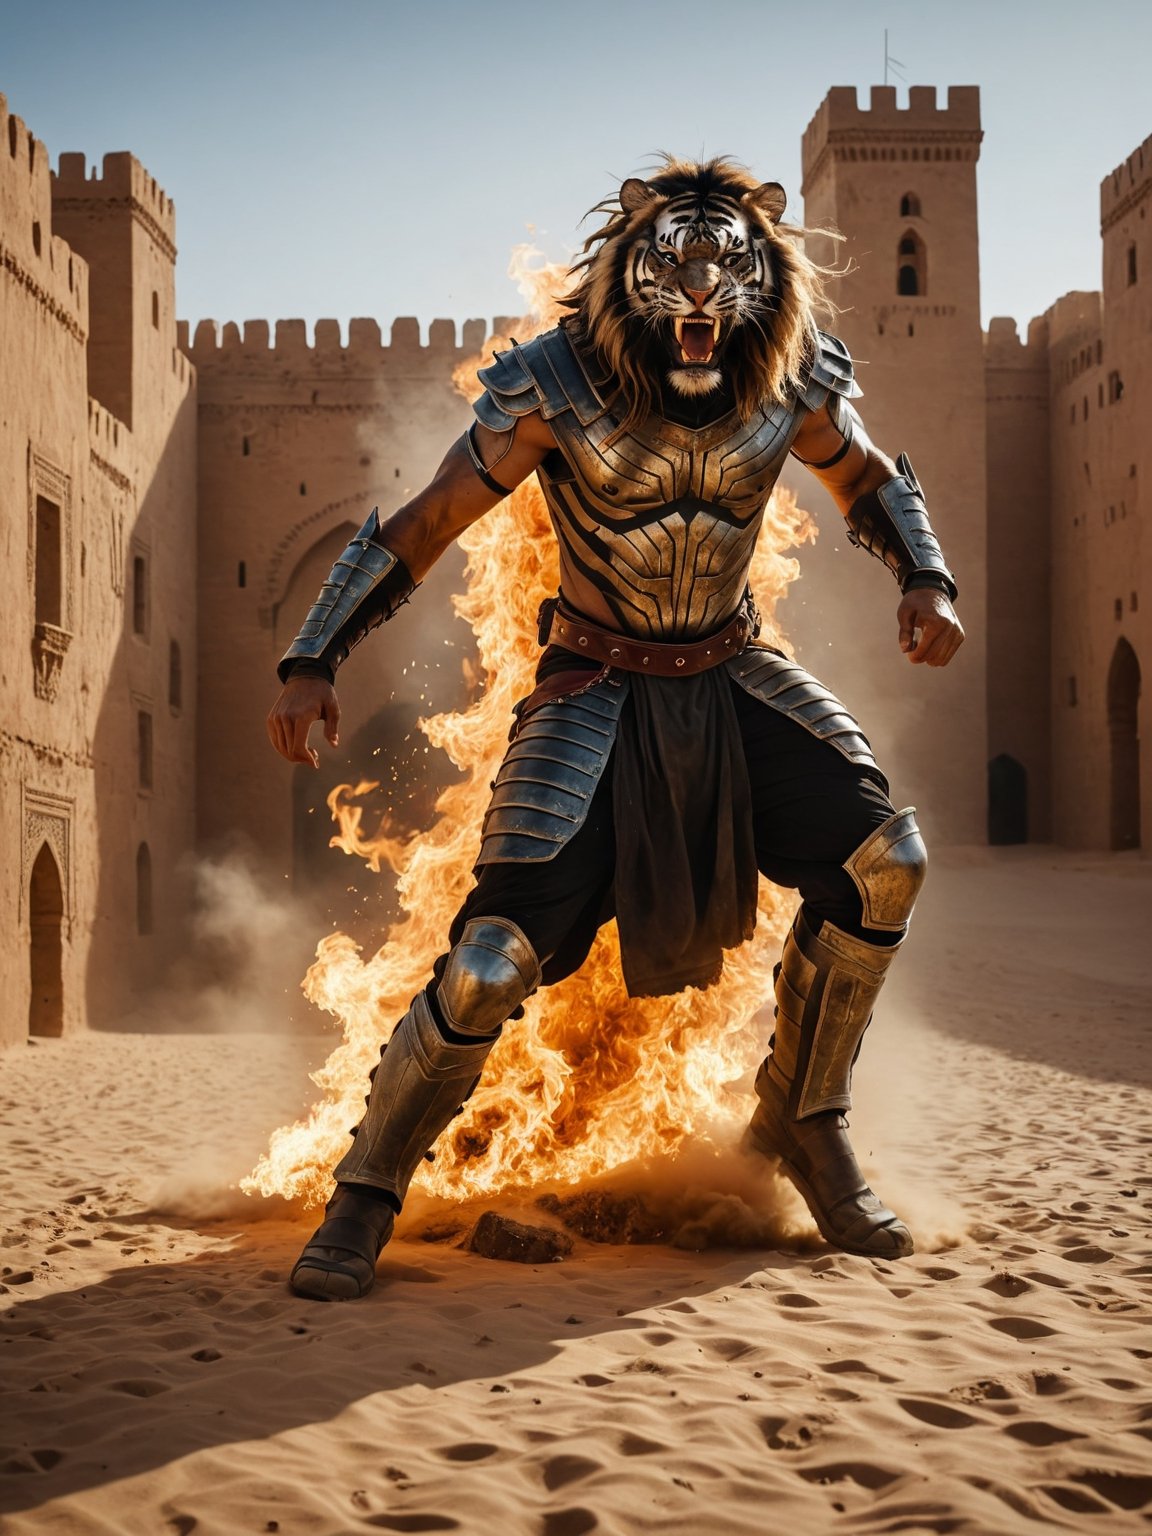 + Metalhead, Tigre, Q2, nomad, in Moroccan desert castle, full body photo view, Horror wave, burning, abyssal, epic cinematographic shot of moving dynamics, main theme of a high budget action film, rough photography, motion blur, better quality, high resolution,